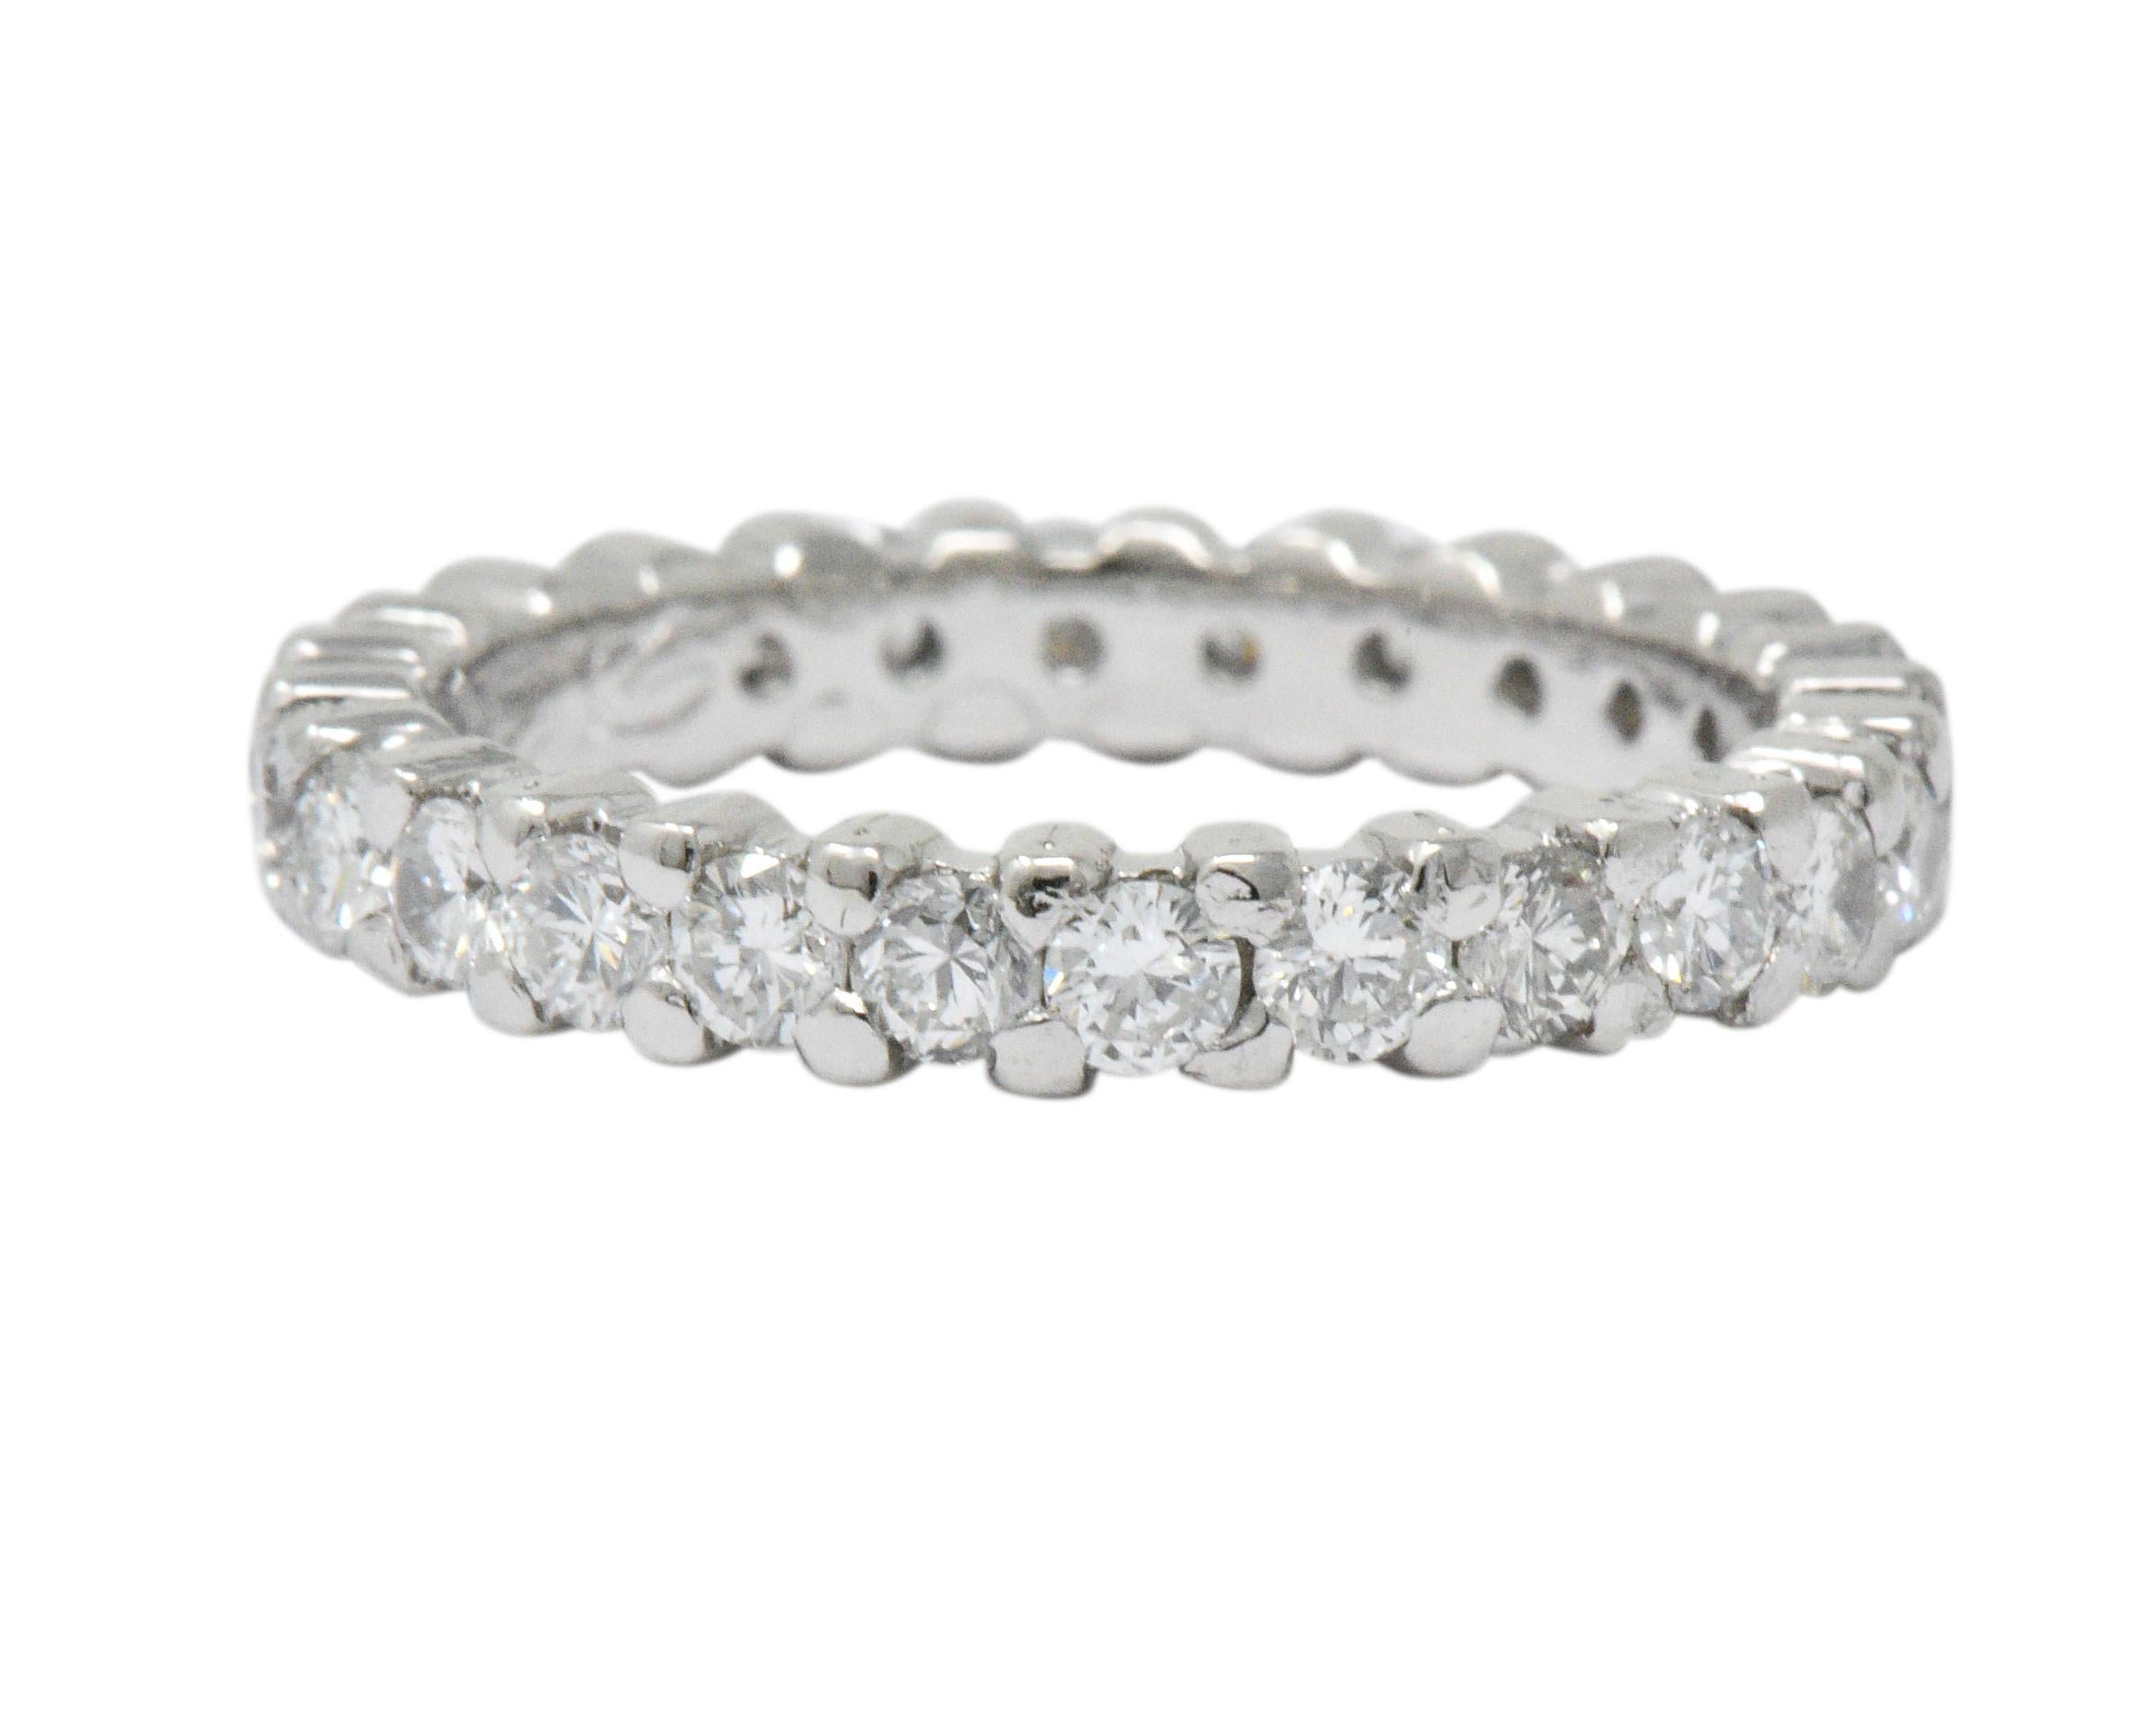 Set with 26 round brilliant cut diamonds weighing approximately 1.30 carats total, GHI color and VS to SI clarity

Prong set for a sleek feel

Tested to be platinum and engraved 

Circa 1957 and great for stacking

Ring Size: 5 & Not Sizable

Top